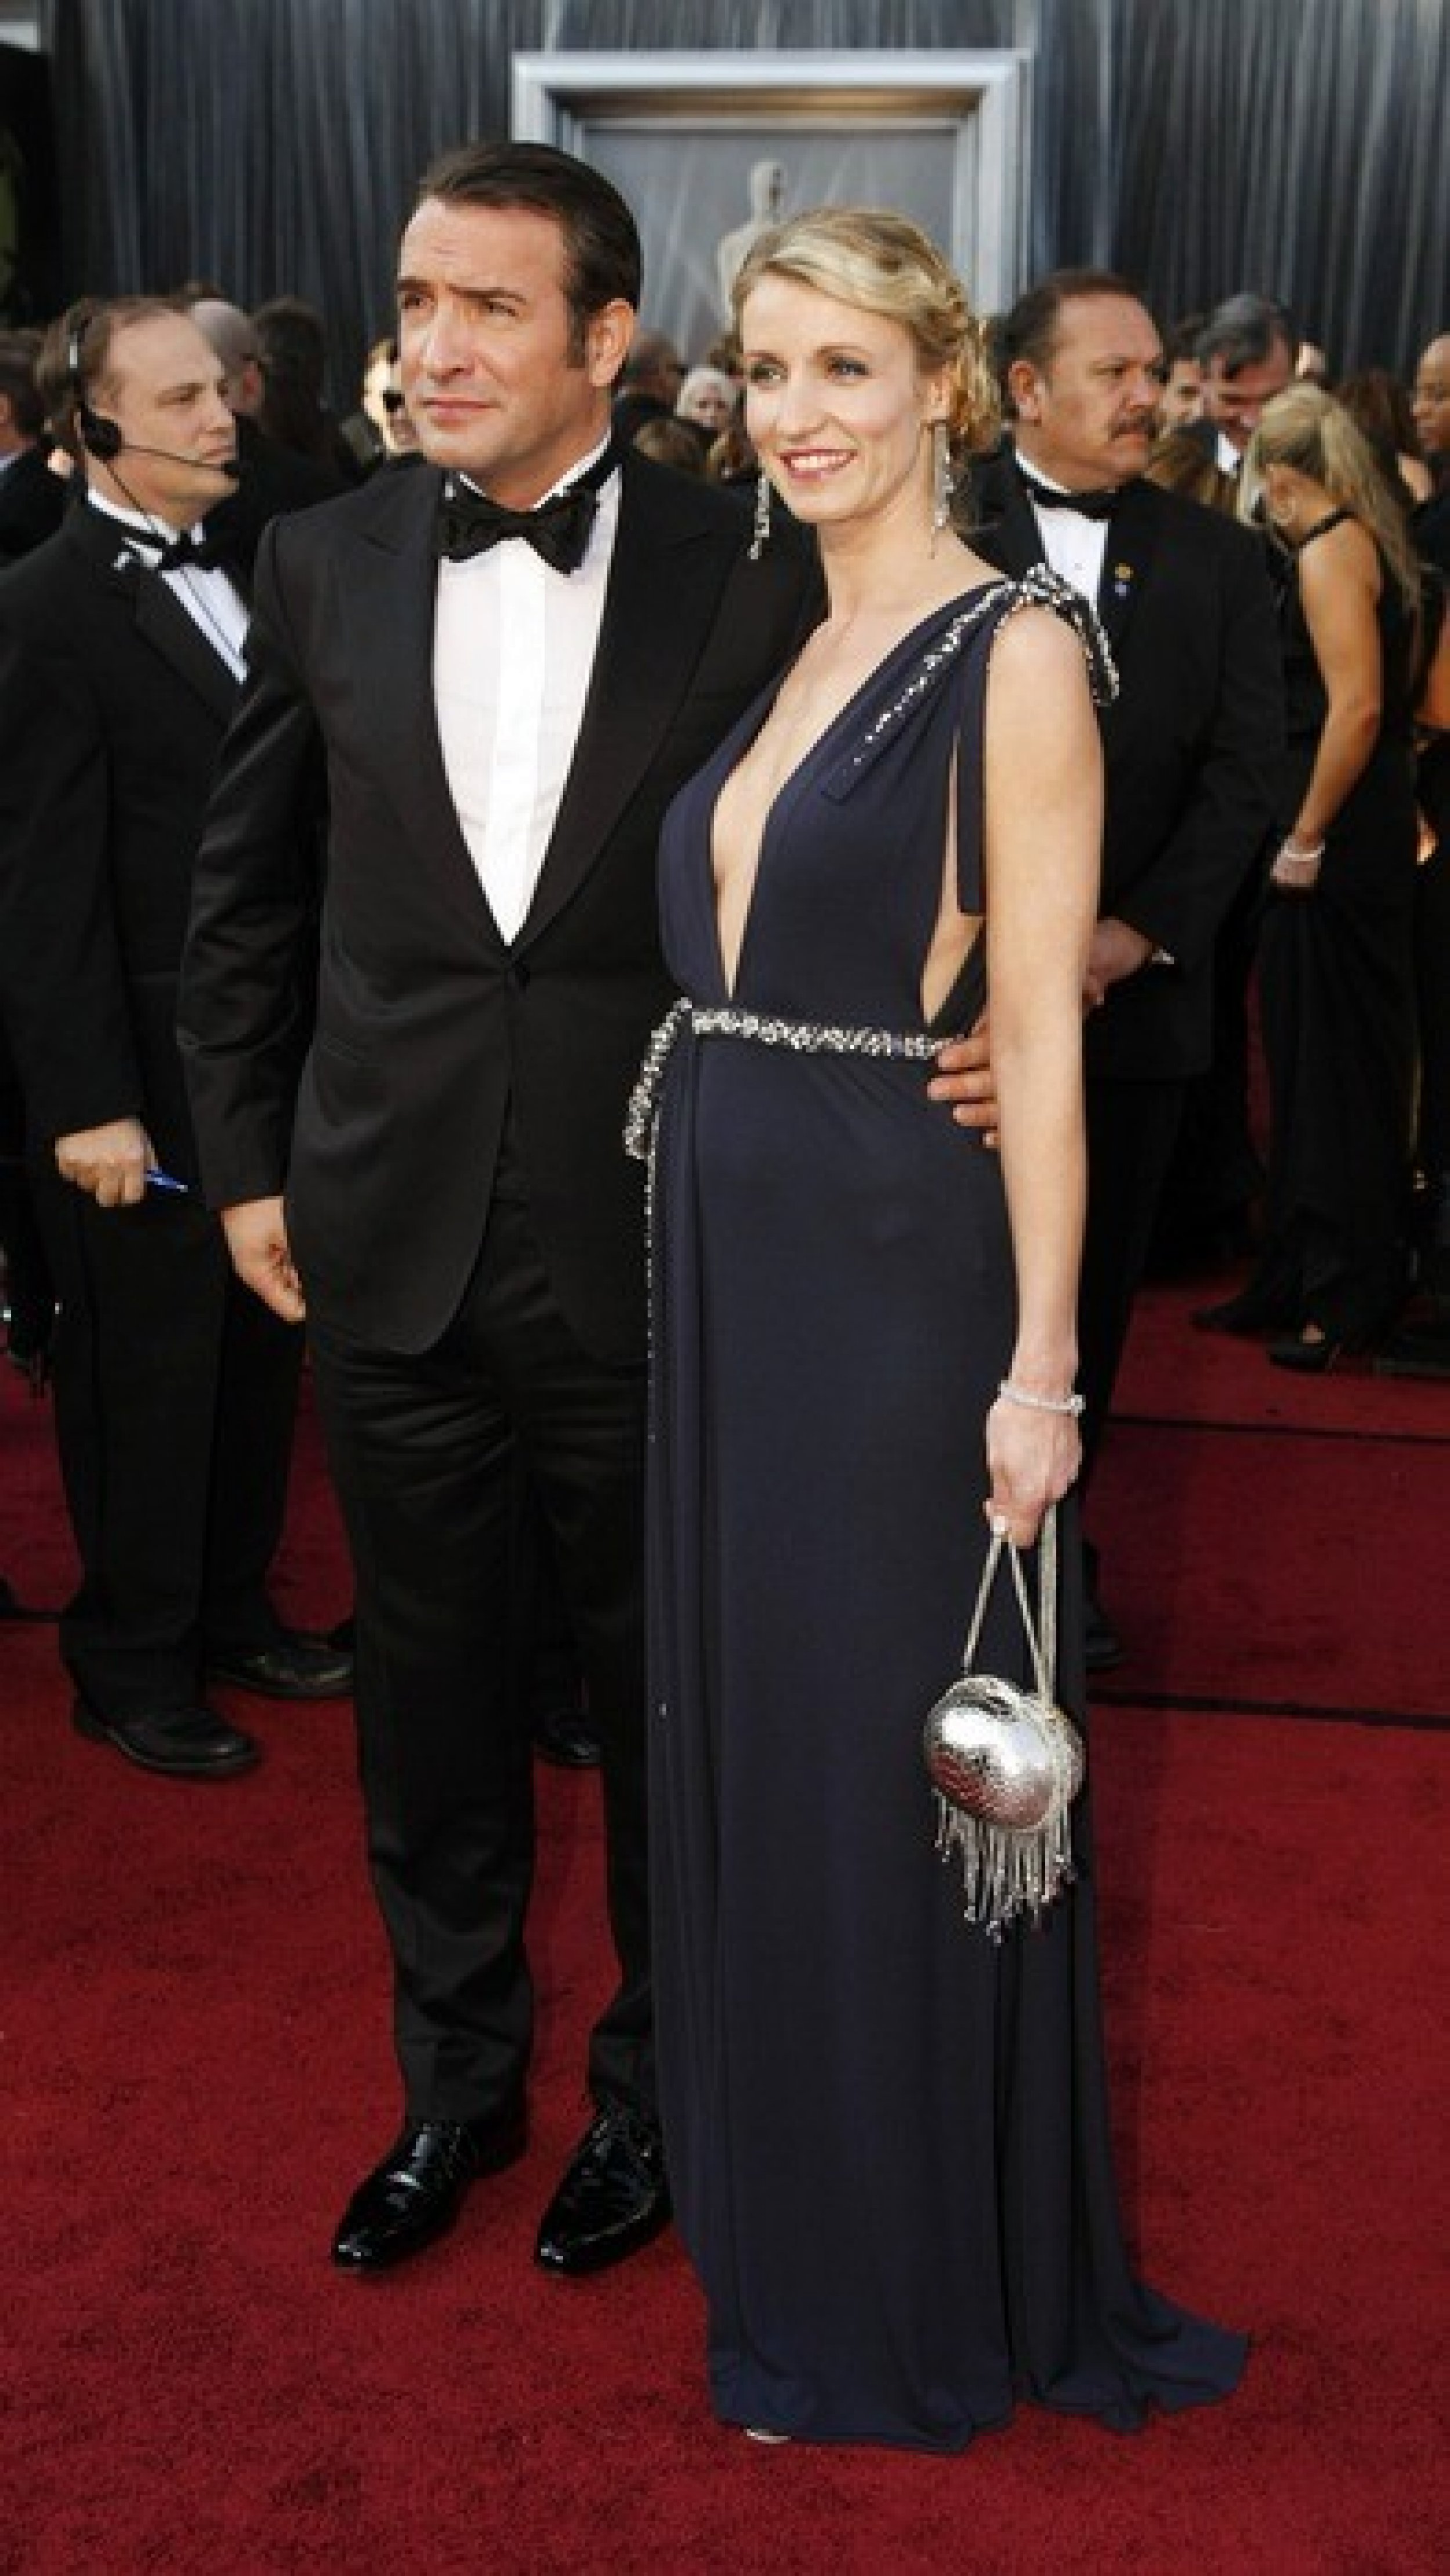 Nominee Jean Dujardin and Alexandra Lamy arrive at the 84th Academy Awards.